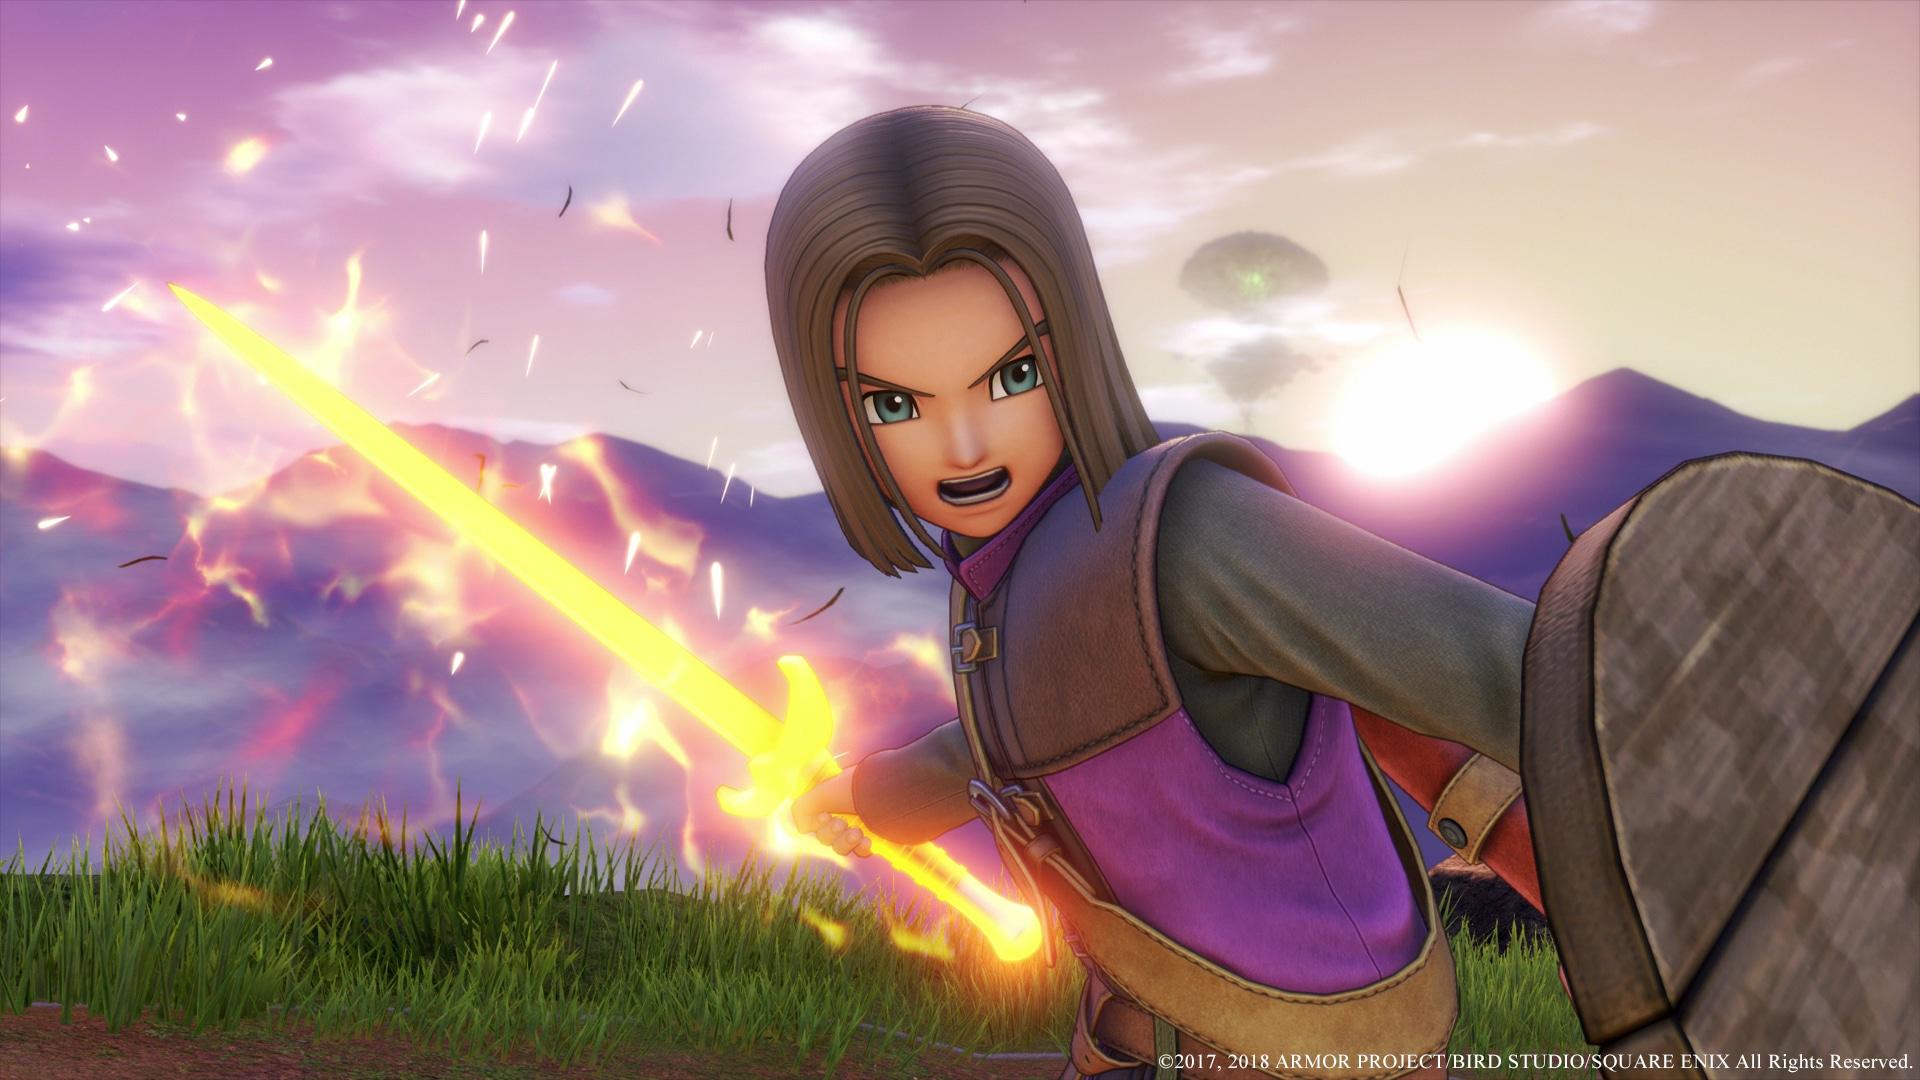 Play 10 Hours of Dragon Quest XI For Free on Switch